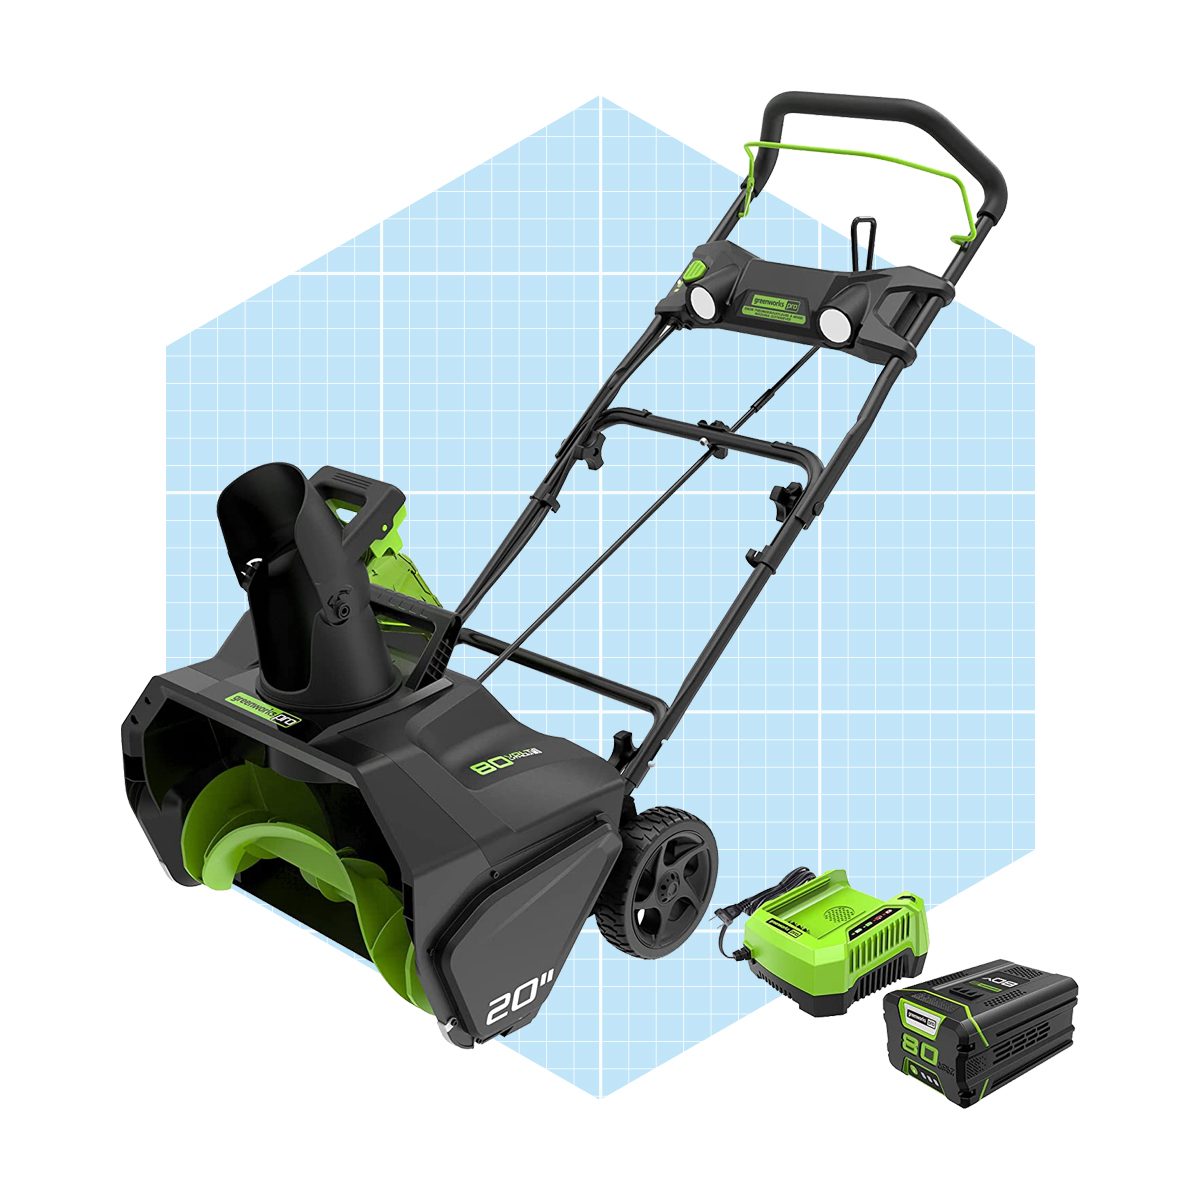 Greenworks Pro 80v 20 Inch Snow Blower With 2ah Battery And Charger Ecomm Amazon.com